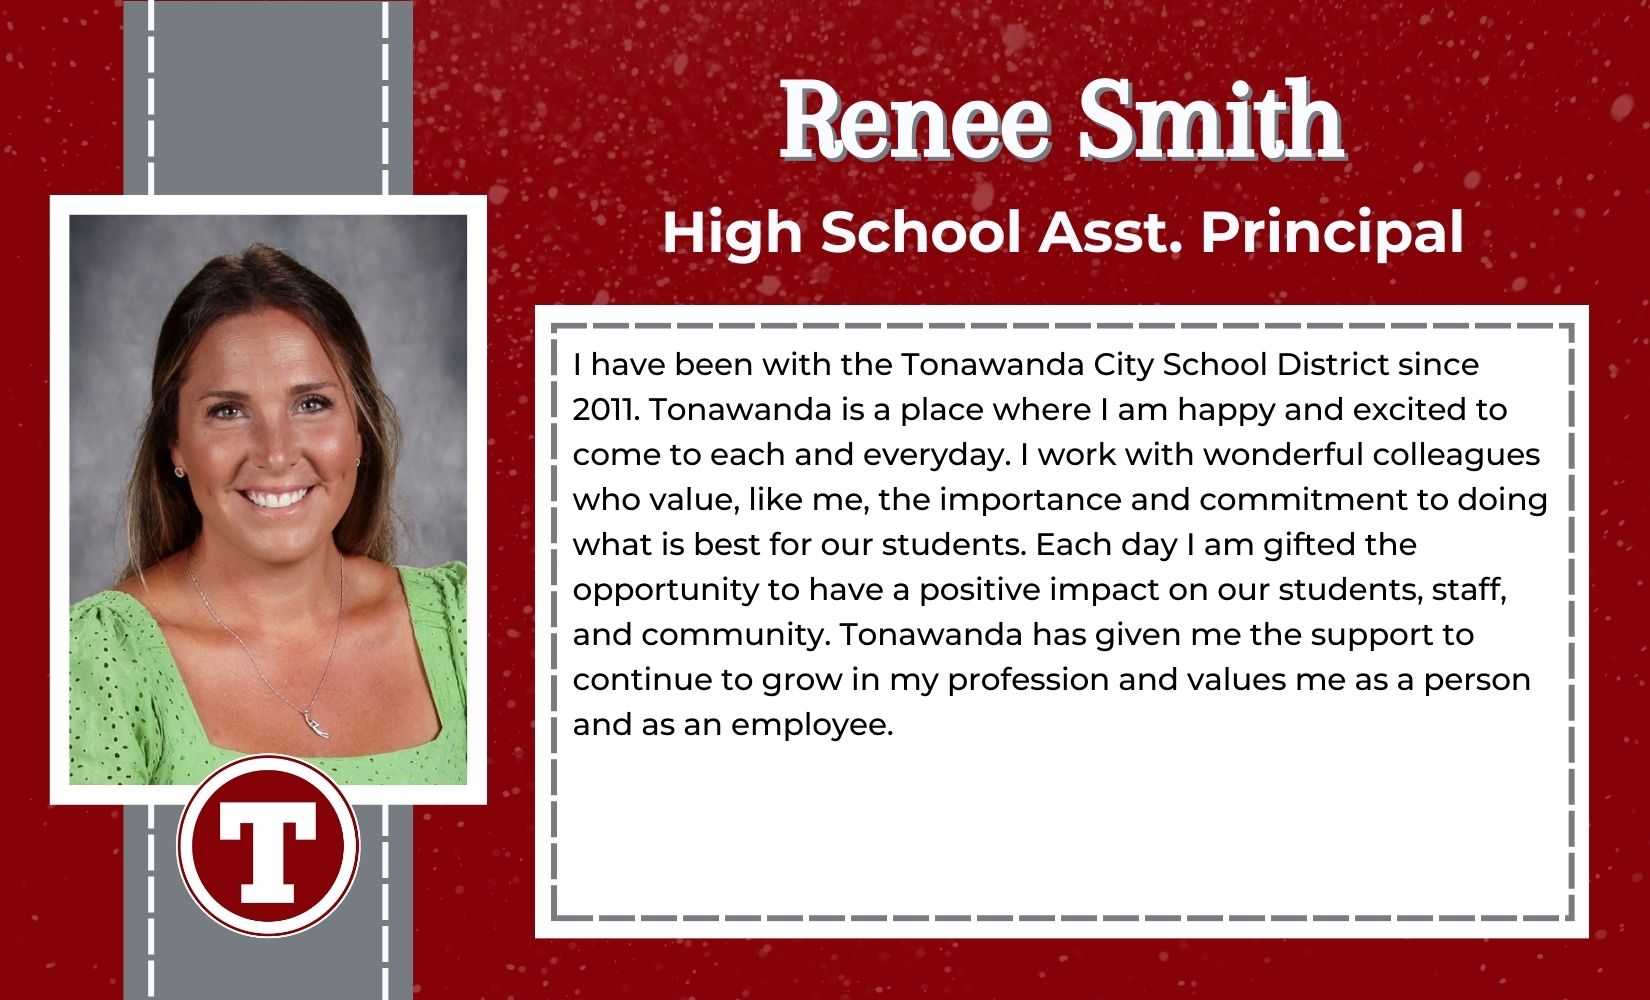 Renee Smith, High School Assistant Principal,  have been with the Tonawanda City School District since 2011. Tonawanda is a place where I am happy and excited to come to each and everyday. I work with wonderful colleagues who value, like me, the importance and commitment to doing what is best for our students. Each day I am gifted the opportunity to have a positive impact on our students, staff, and community. Tonawanda has given me the support to continue to grow in my profession and values me as a person and as an employee. 